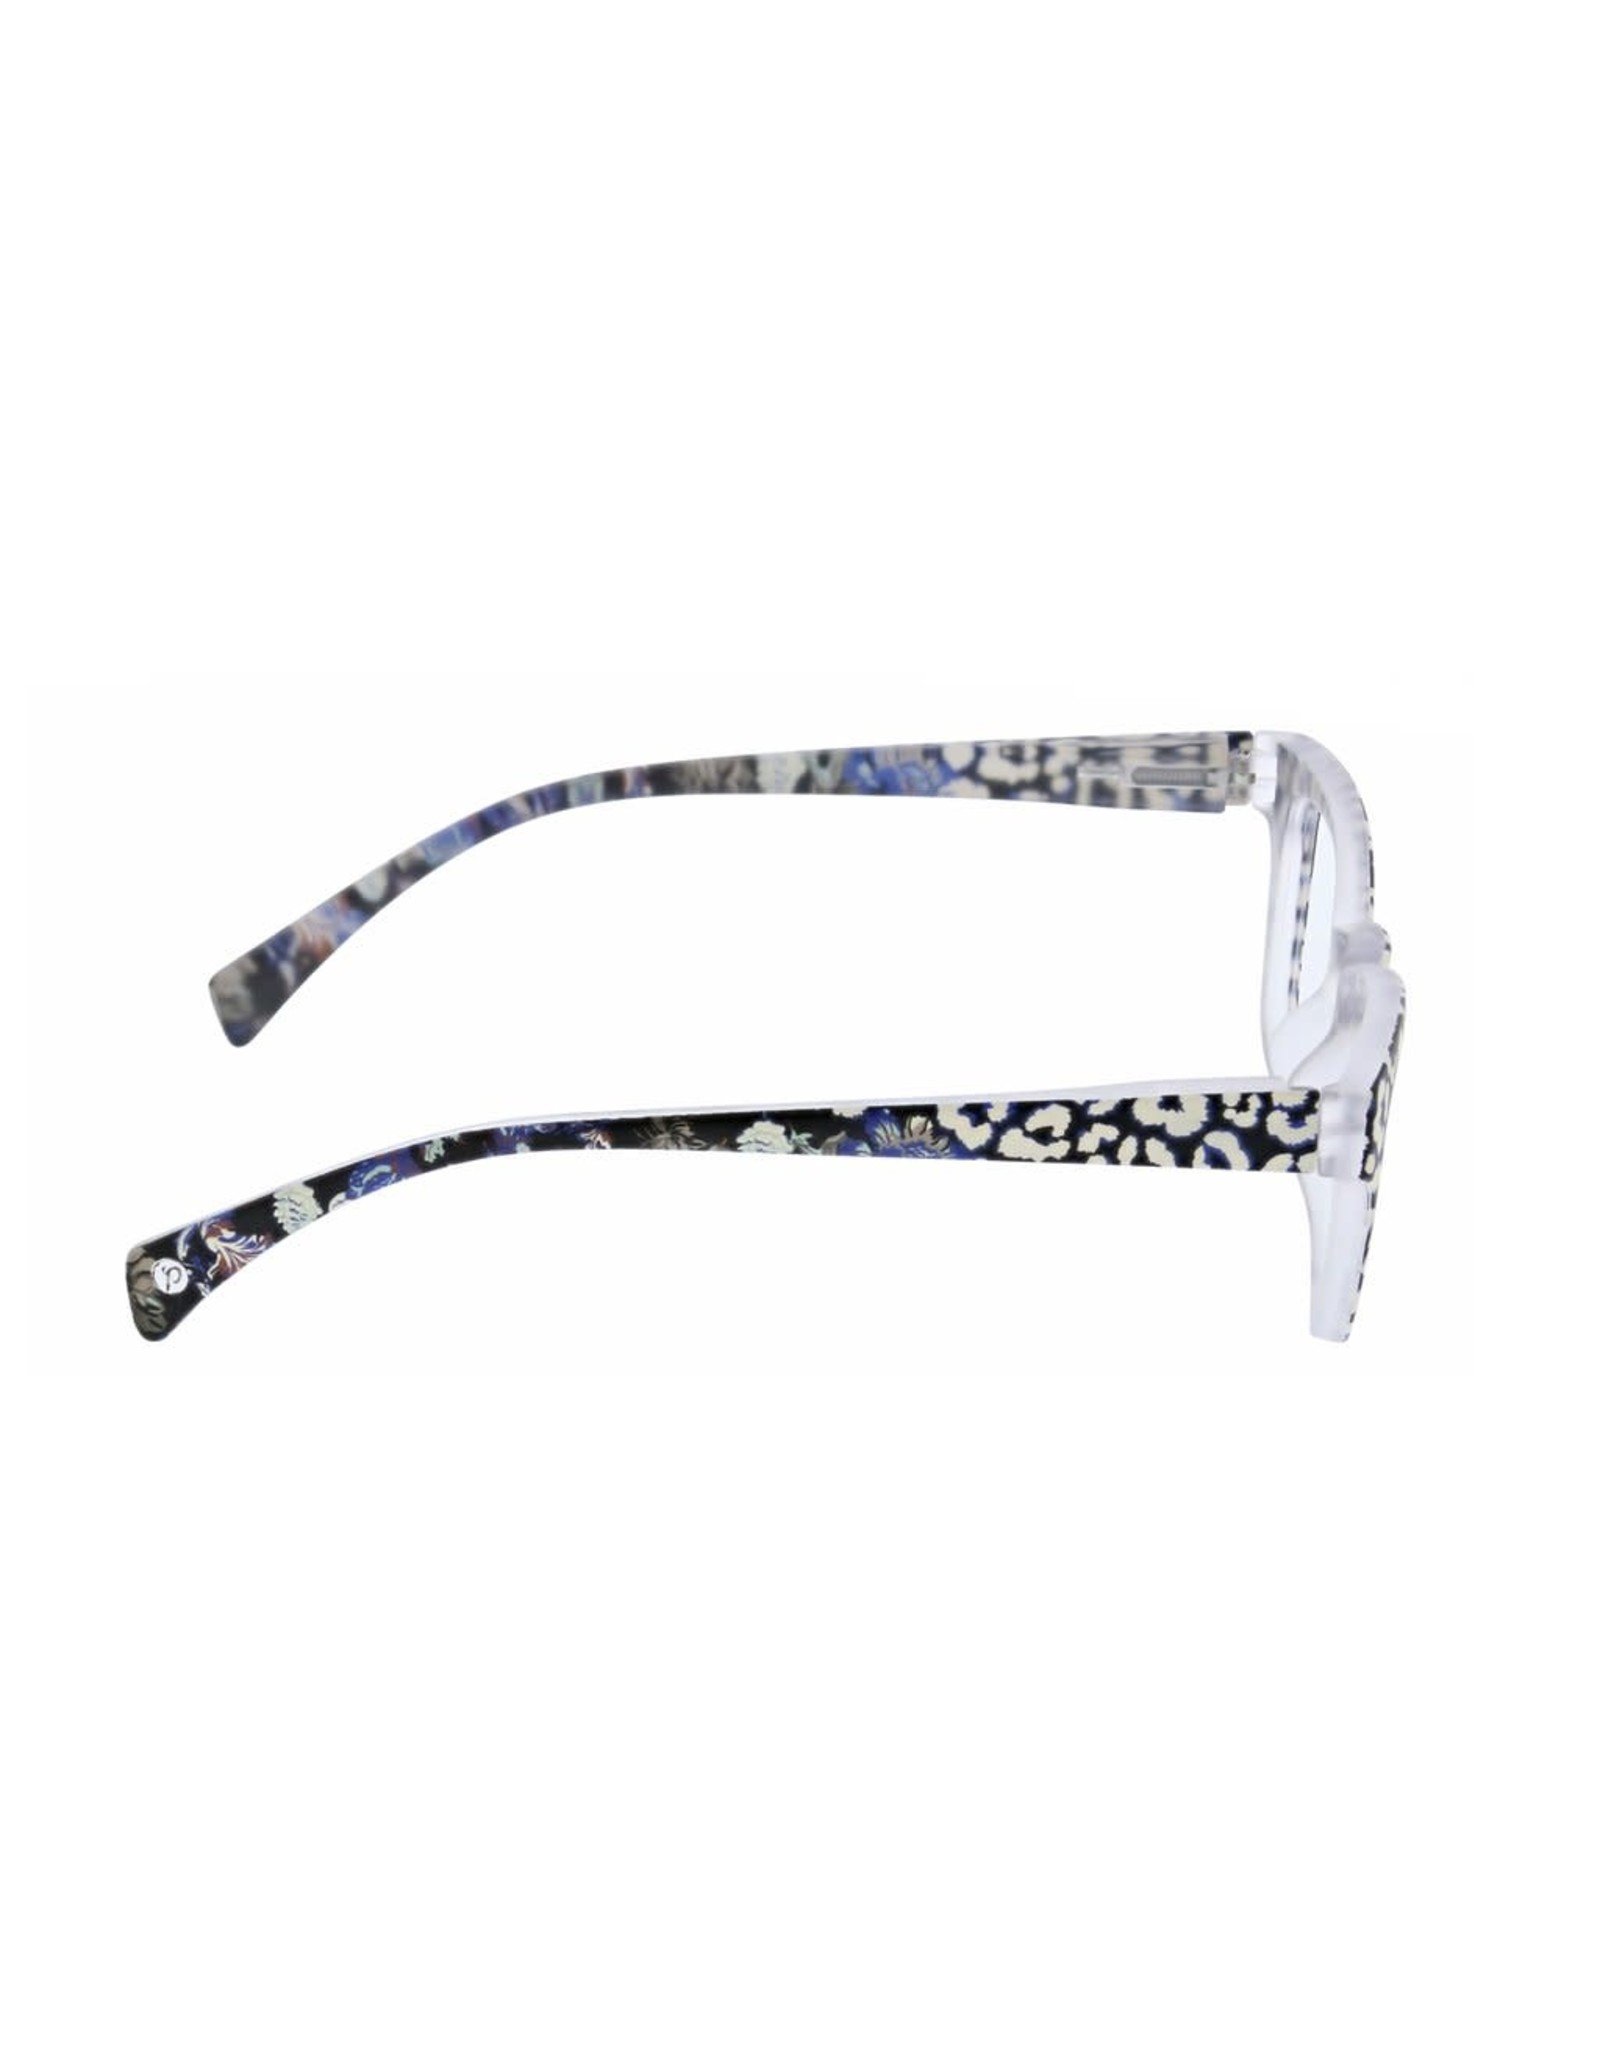 Reading Glasses Orchid Island White Leopard +2.00